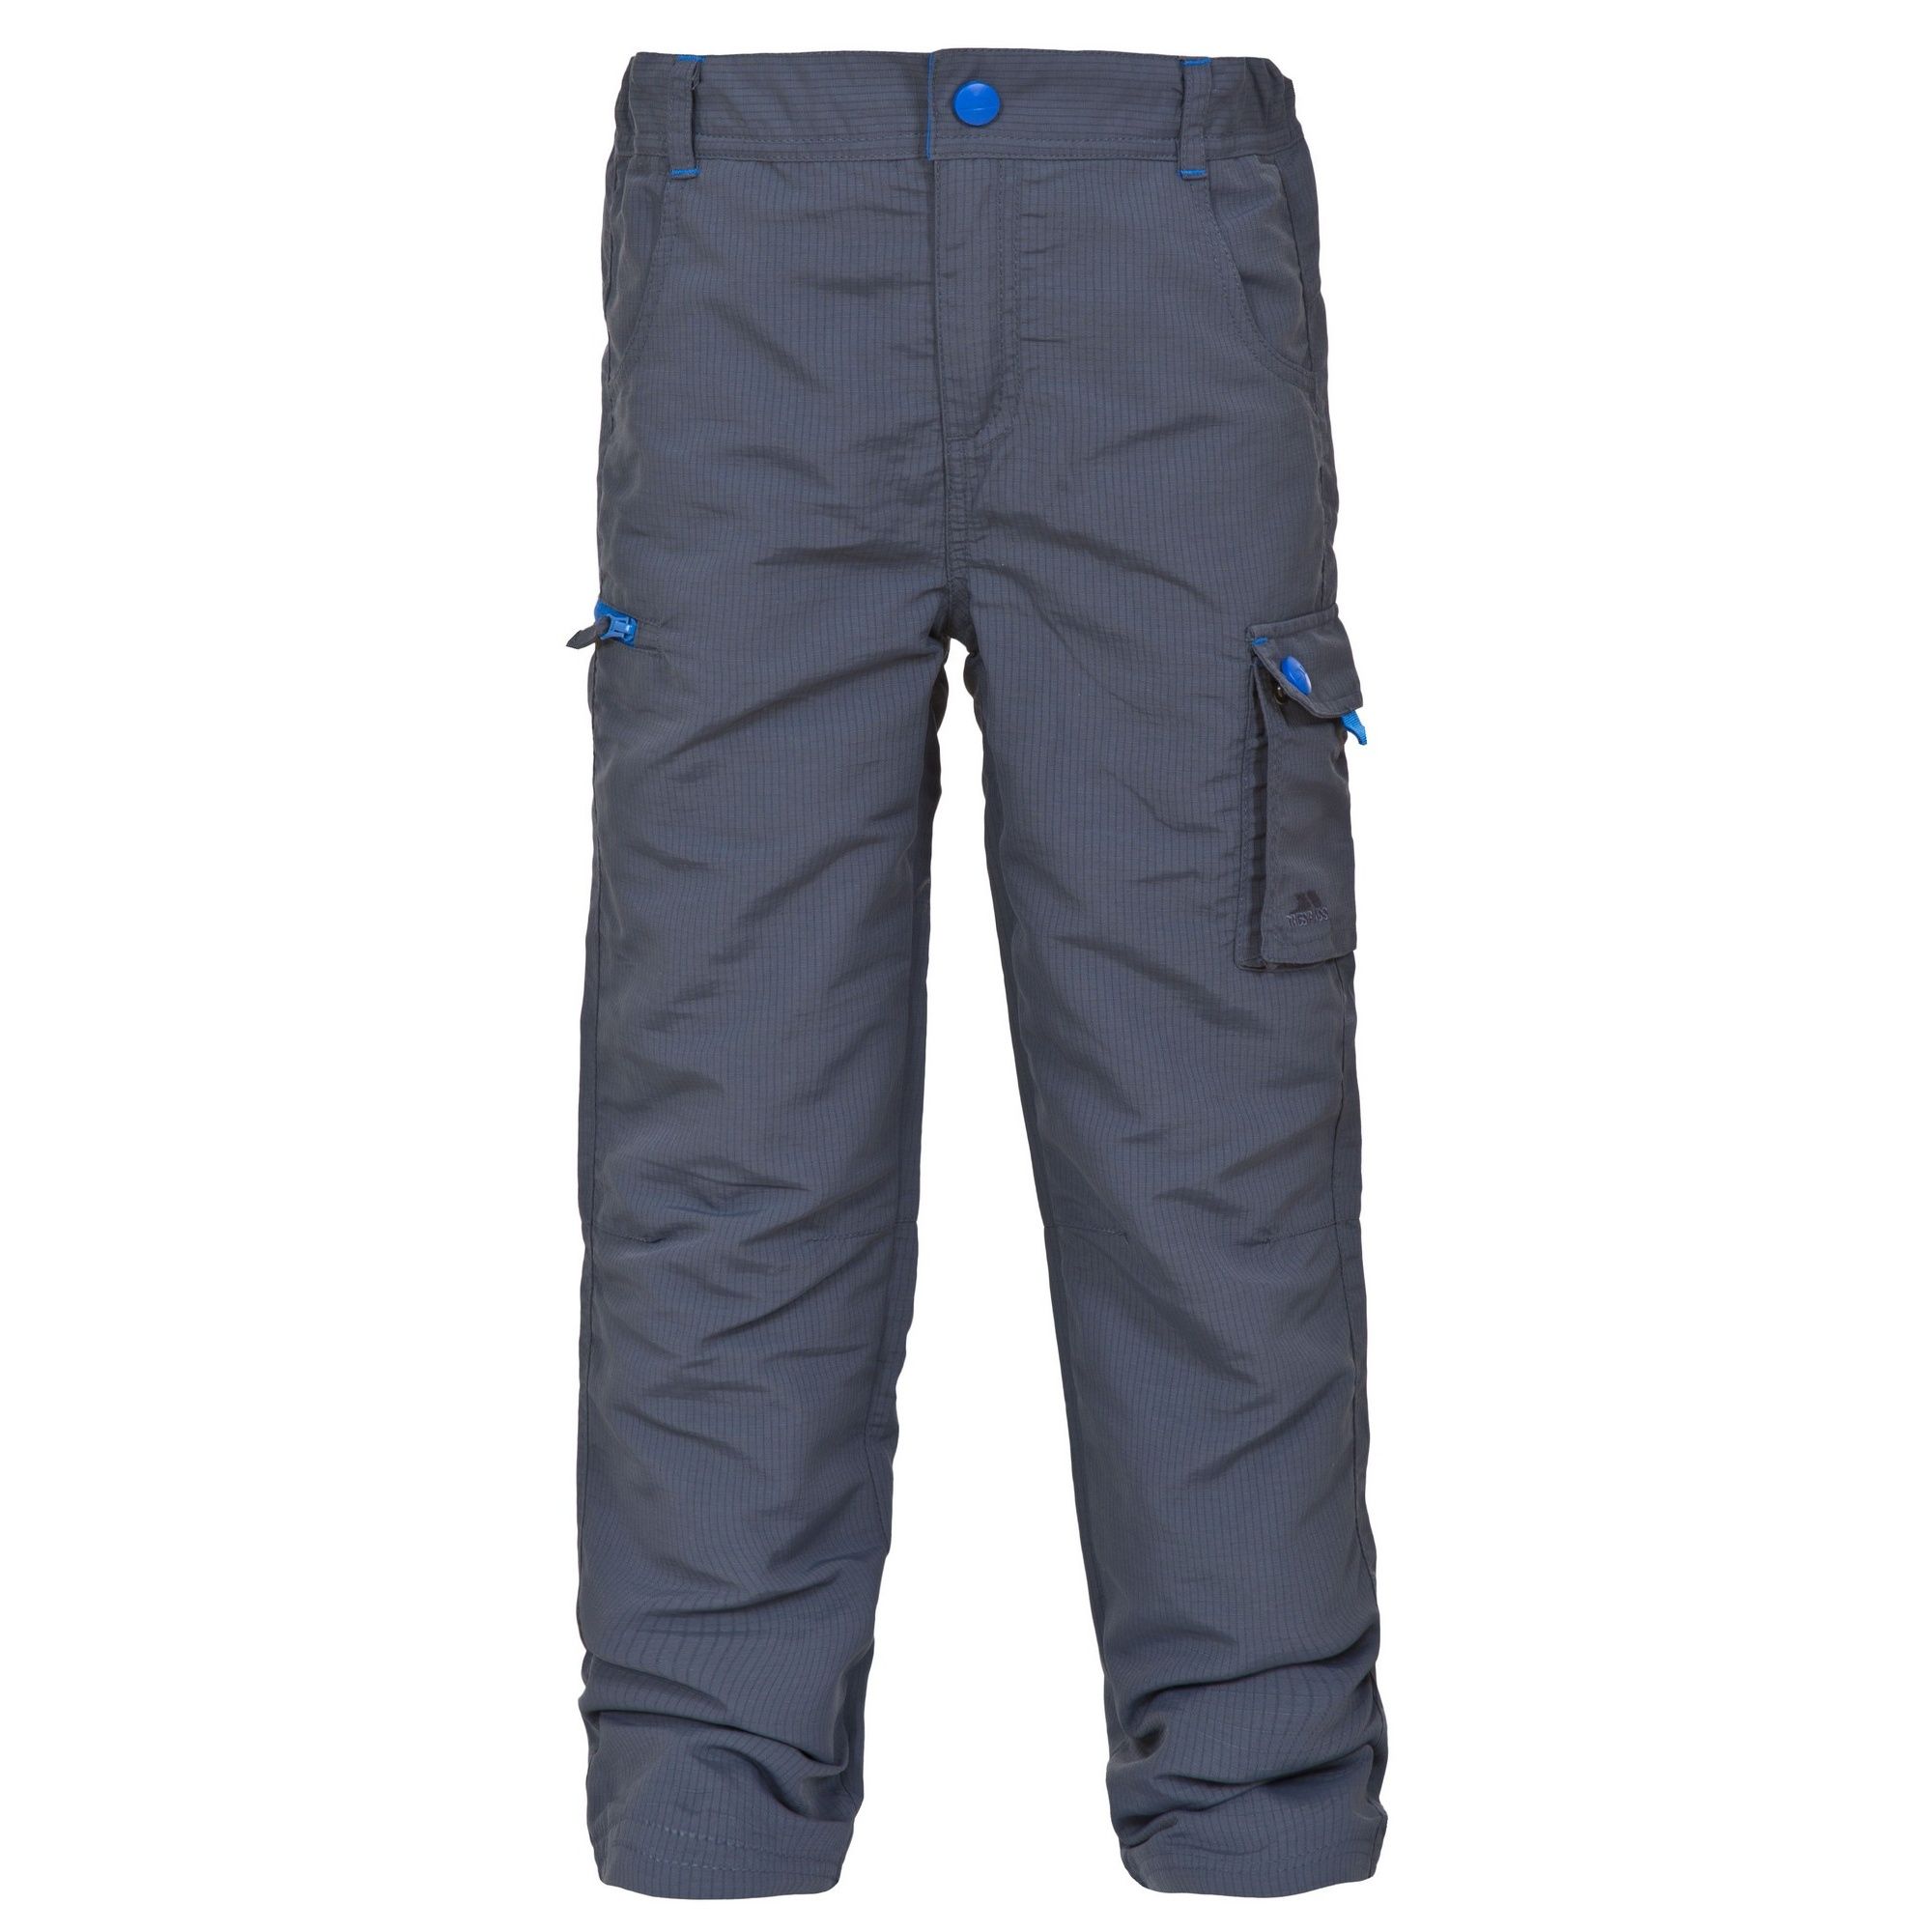 Tricot lined trouser. 2 upper zip pockets. 1 patch pocket on leg. Inner waist adjustment elastic. Contrast inner waistband and bartracks. DWR finish. UV protection. Shell: 100% Polyamide Ripstop, Lining: 100% Polyester. Trespass Childrens Waist Sizing (approx): 2/3 Years - 20in/50.5cm, 3/4 Years - 21in/53cm, 5/6 Years - 22in/56cm, 7/8 Years - 23in/58.5cm, 9/10 Years - 24in/61cm, 11/12 Years - 26in/66cm.